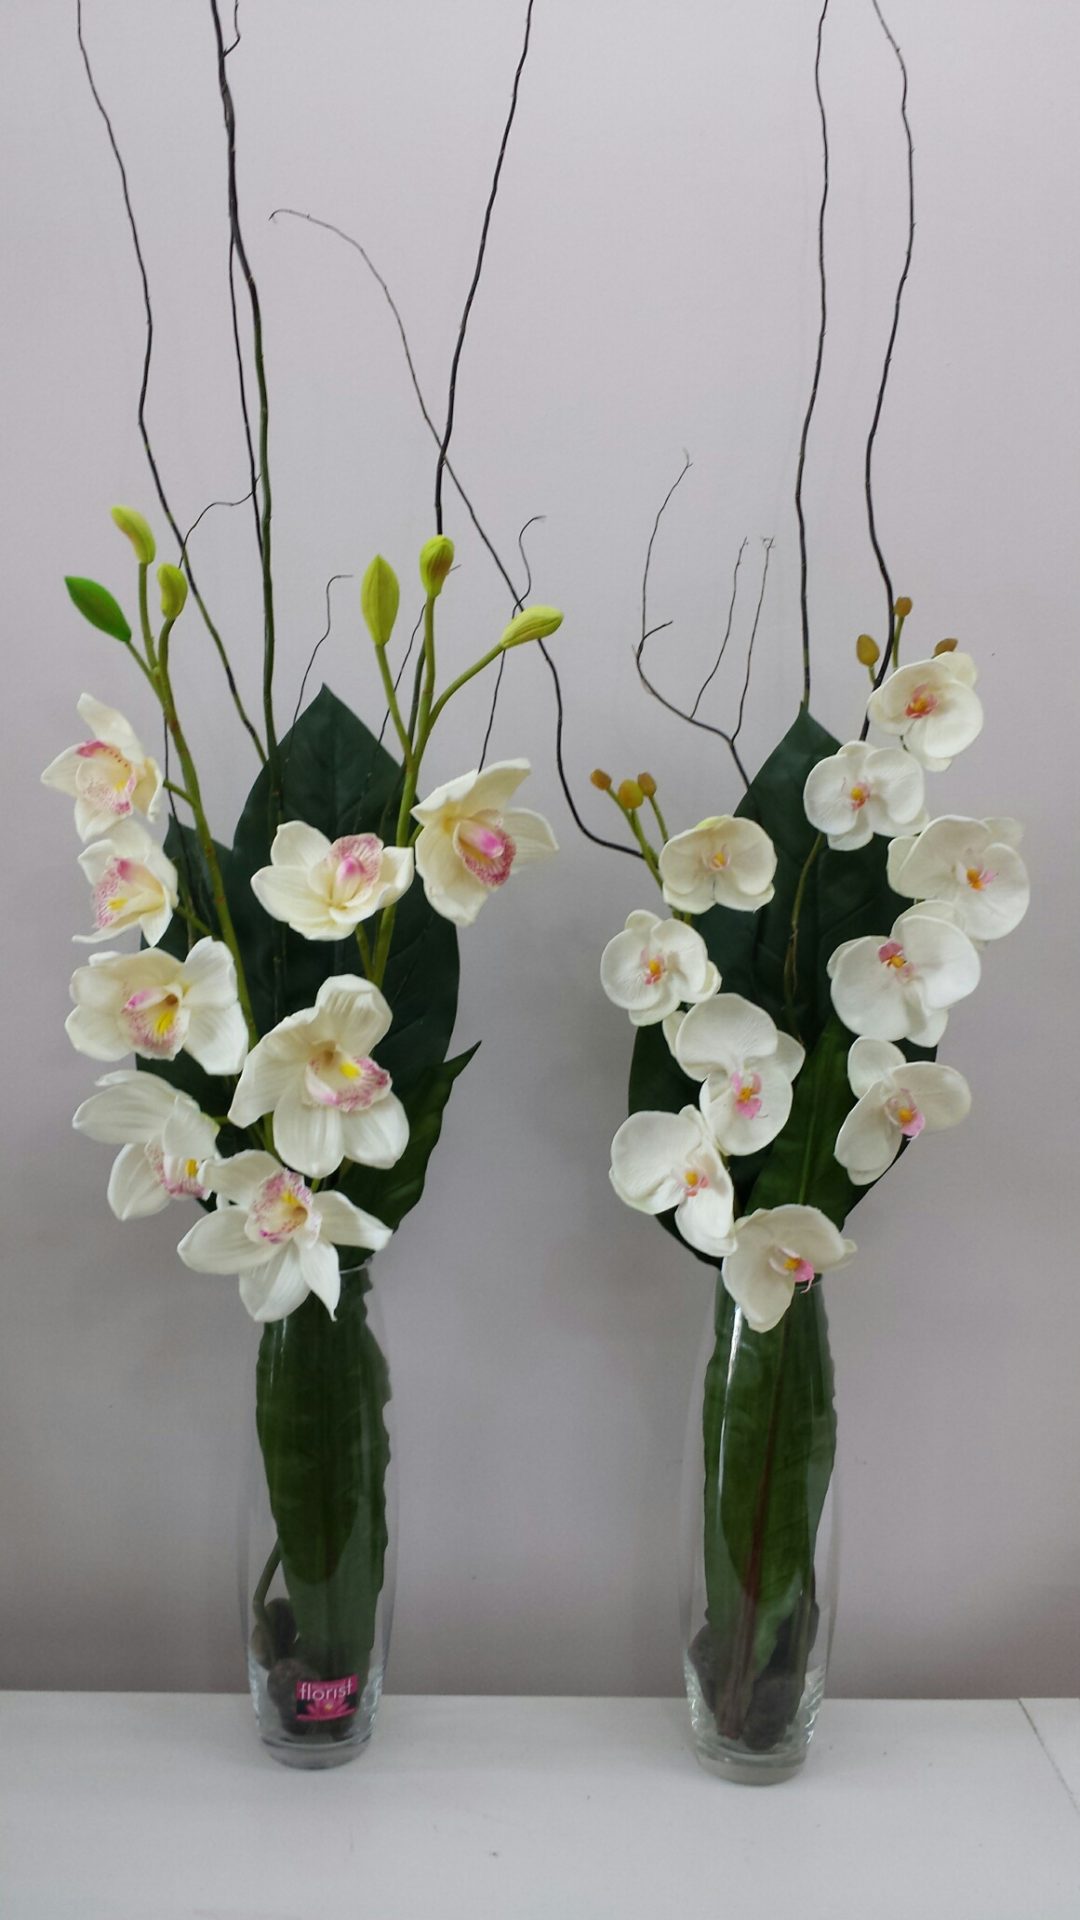 Tall glass vases with Orchids and willow sticks